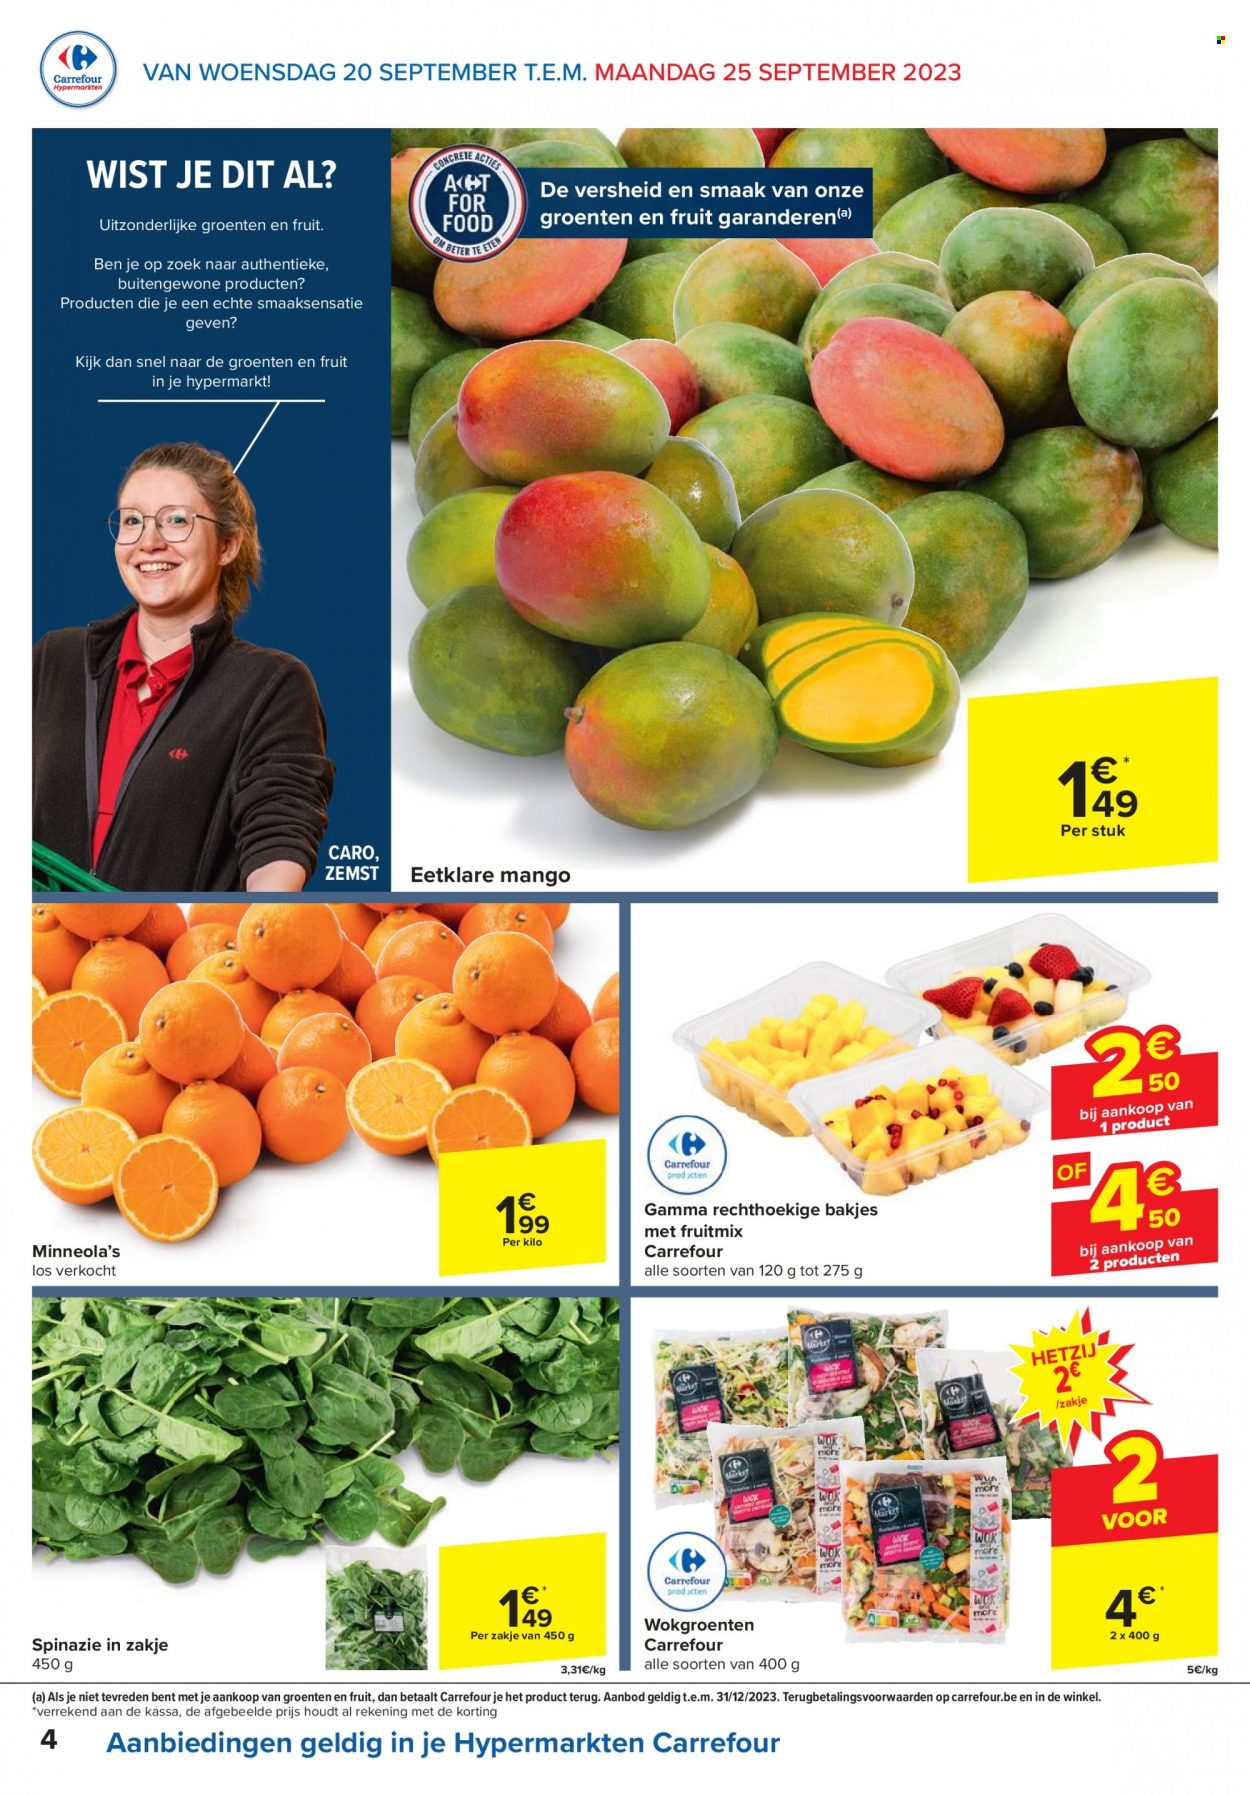 Catalogue Carrefour hypermarkt - 20.9.2023 - 2.10.2023. Page 4.